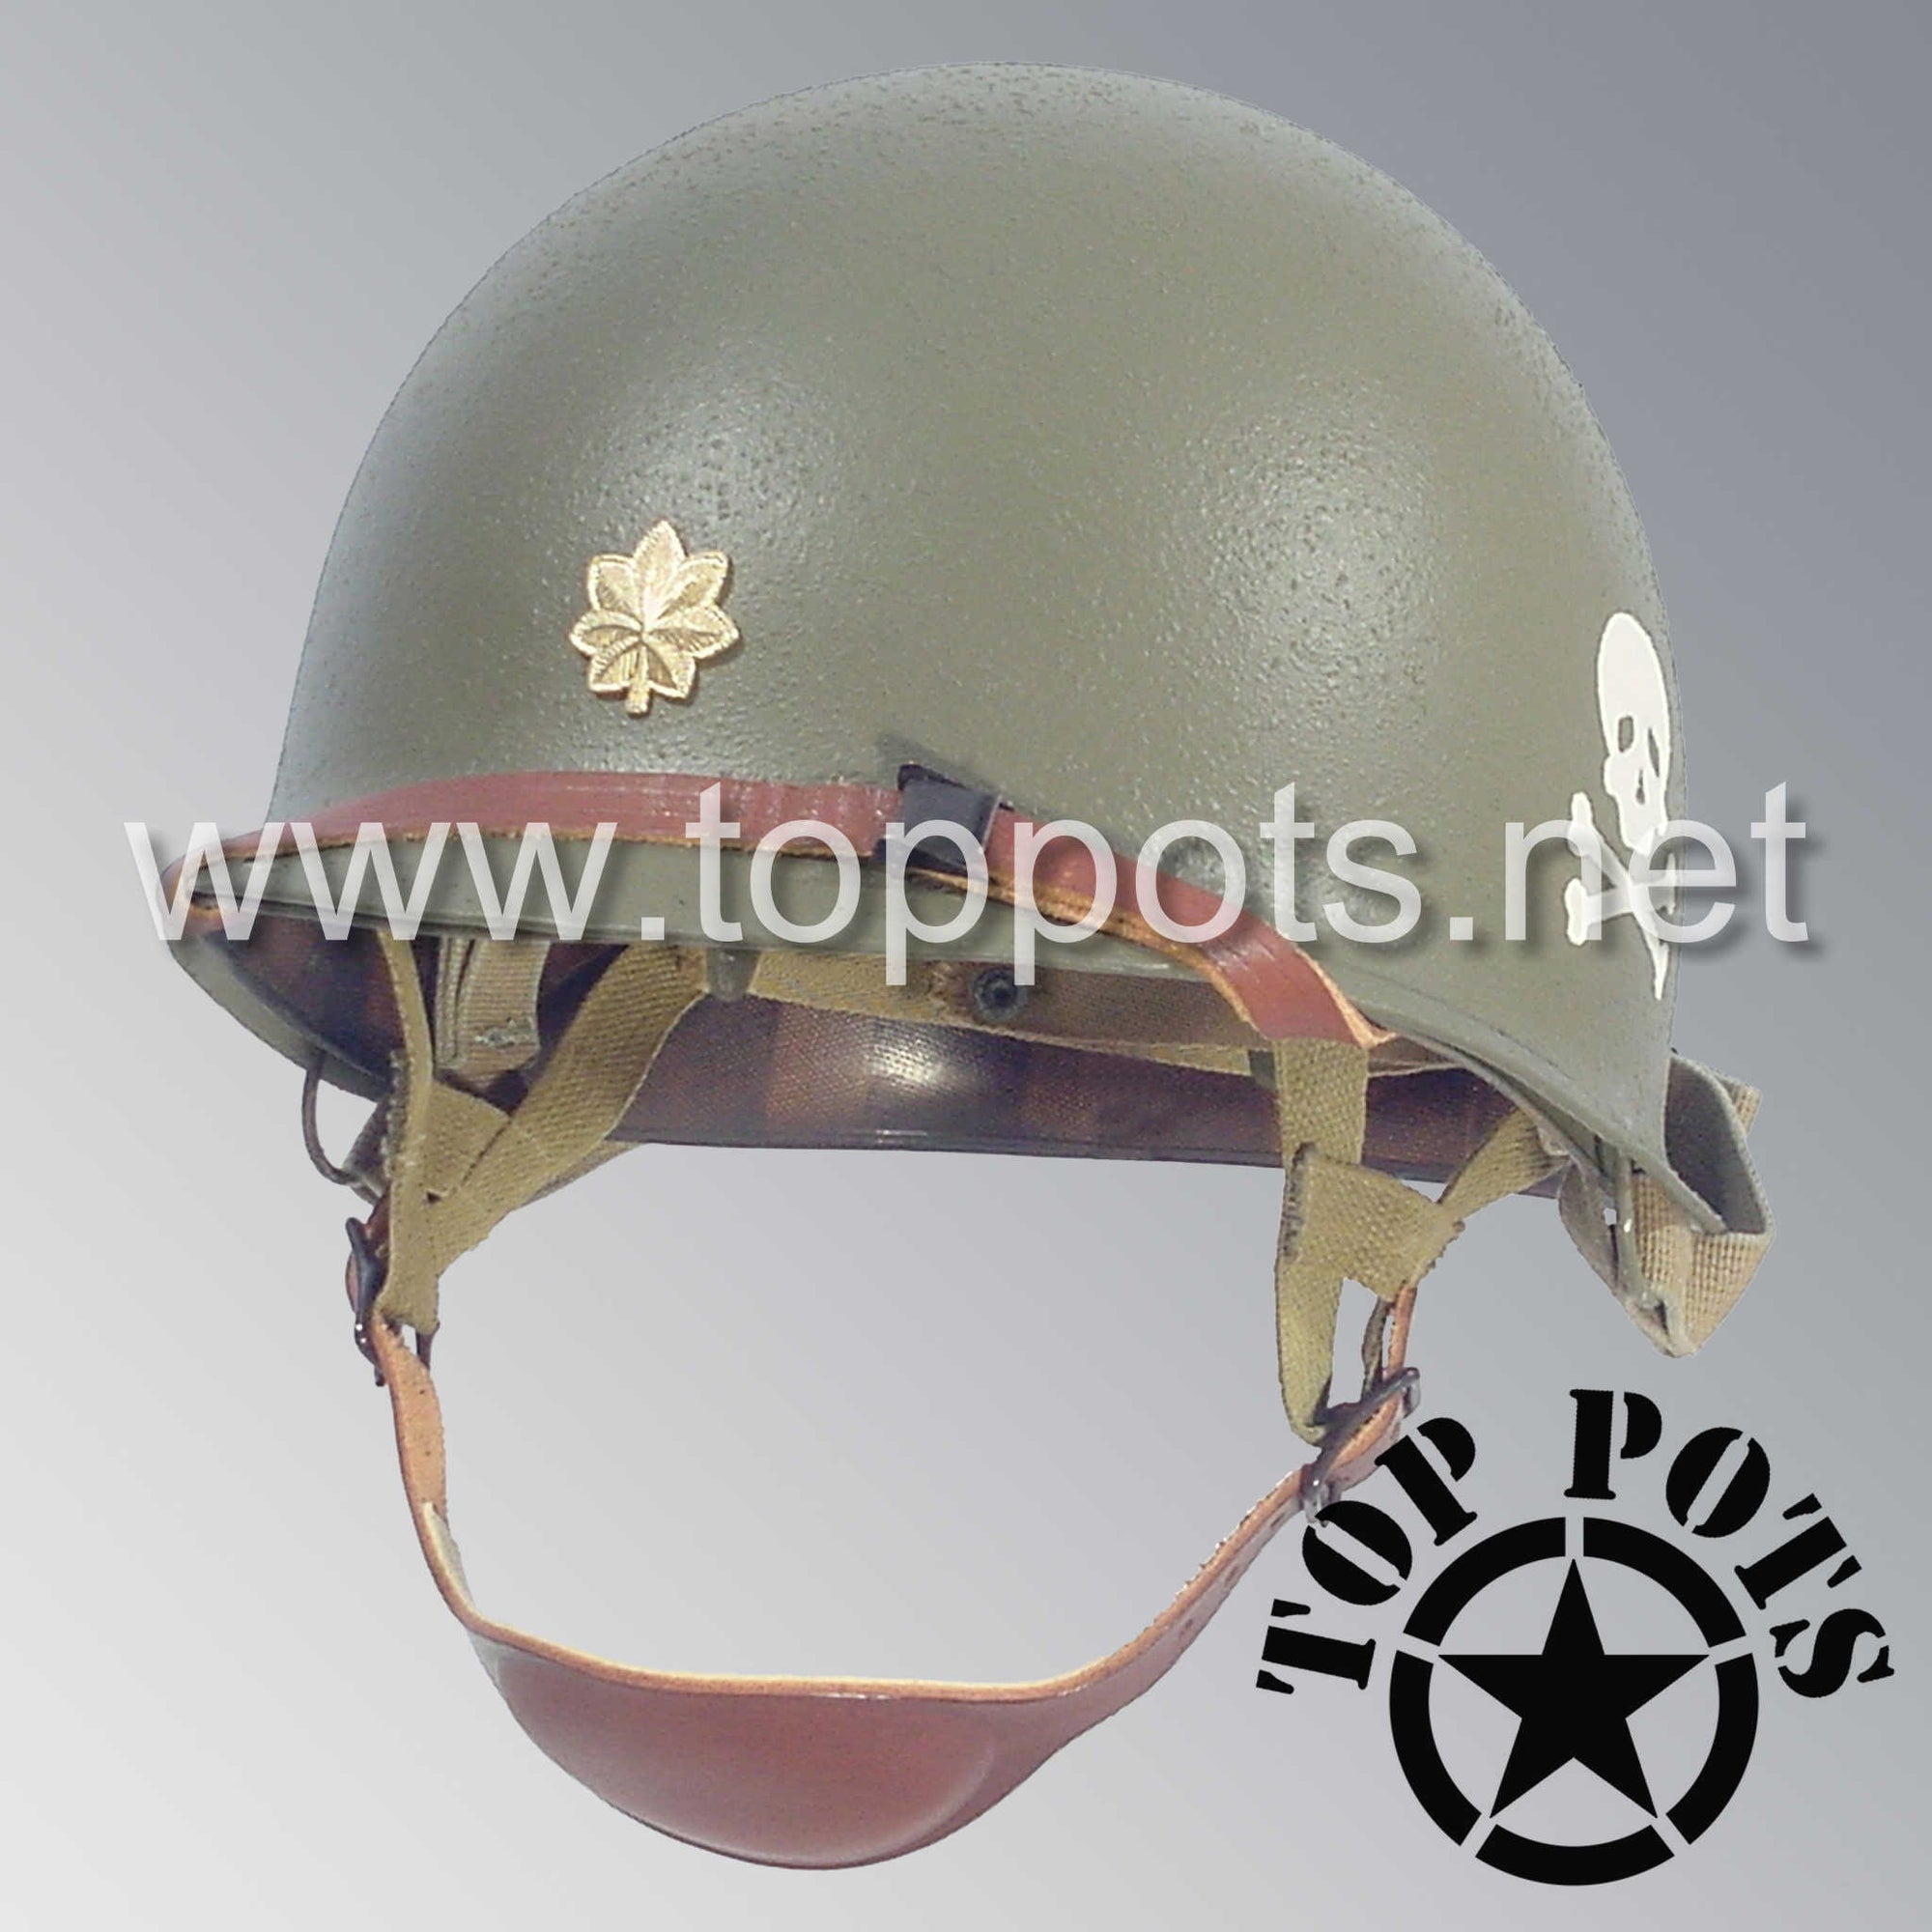 WWII US Army Restored Original M2 Paratrooper Airborne Helmet D Bale Shell and Liner with 504th PIR Officer Metal Major Rank Emblem